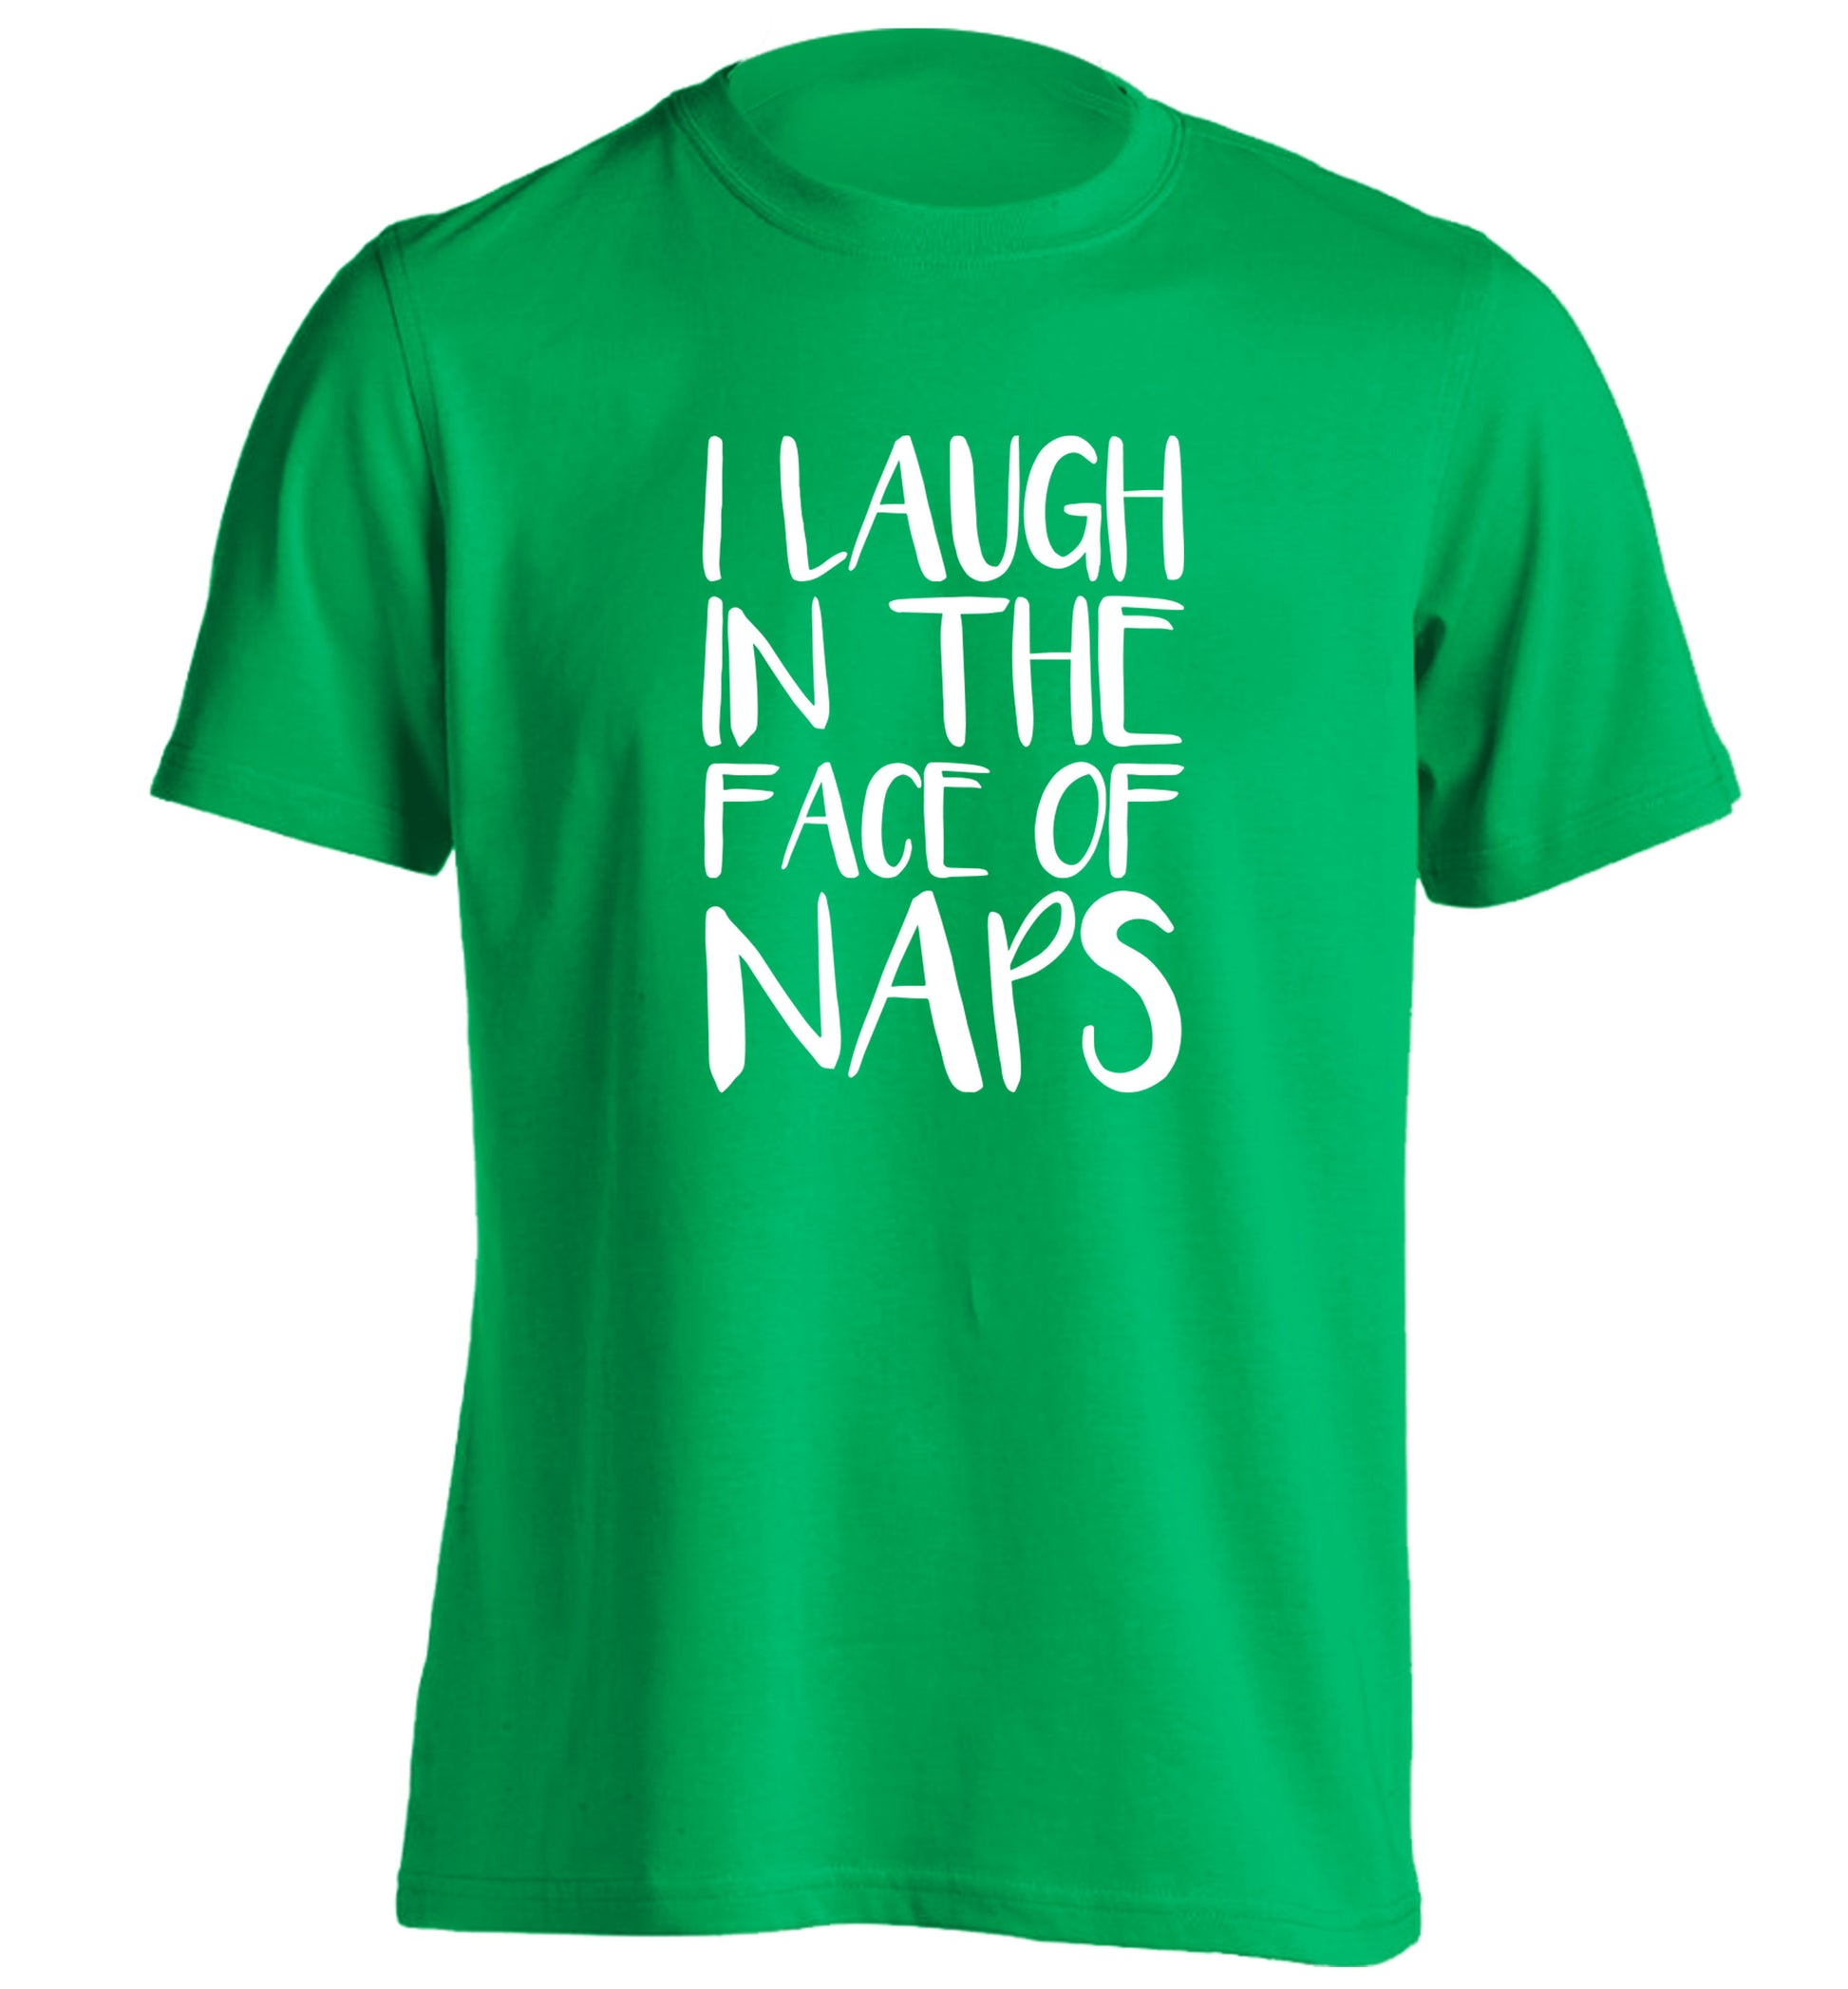 I laugh in the face of naps adults unisex green Tshirt 2XL